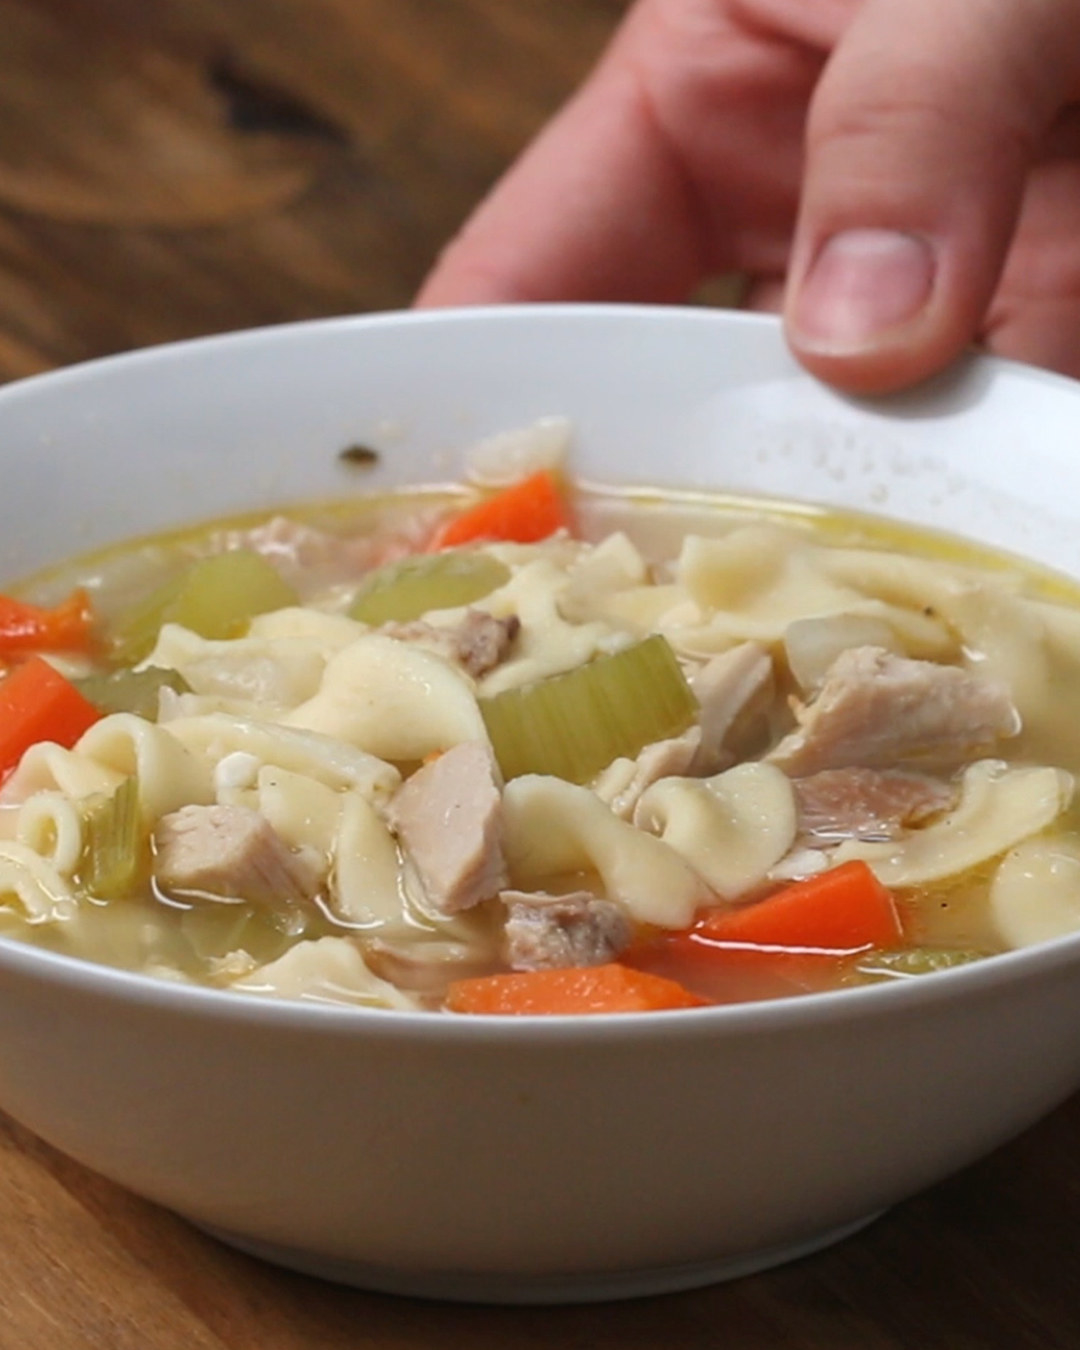 Get Together With Your Friends And Smile Over This Chicken Noodle Soup